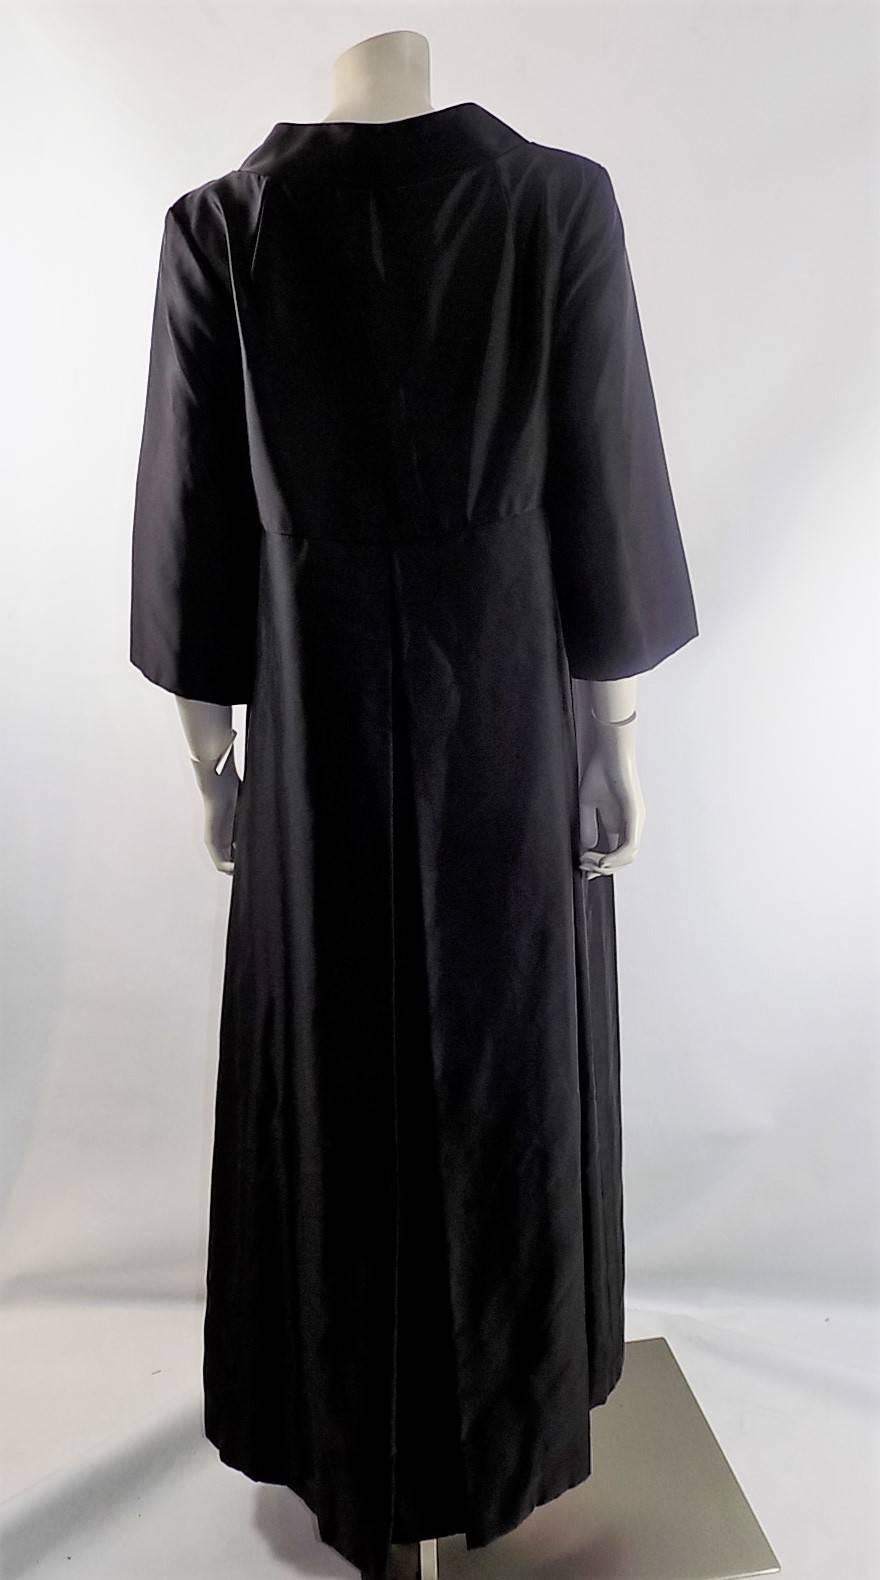 Floor length black satin in pristine condition like new. Wide  collar,  Empire cut with front bow  and 3/4 sleeves . Hidden snap closure. Fully lined. Amazing crisp look. So perfect over gown with gloves. 
Bust  38